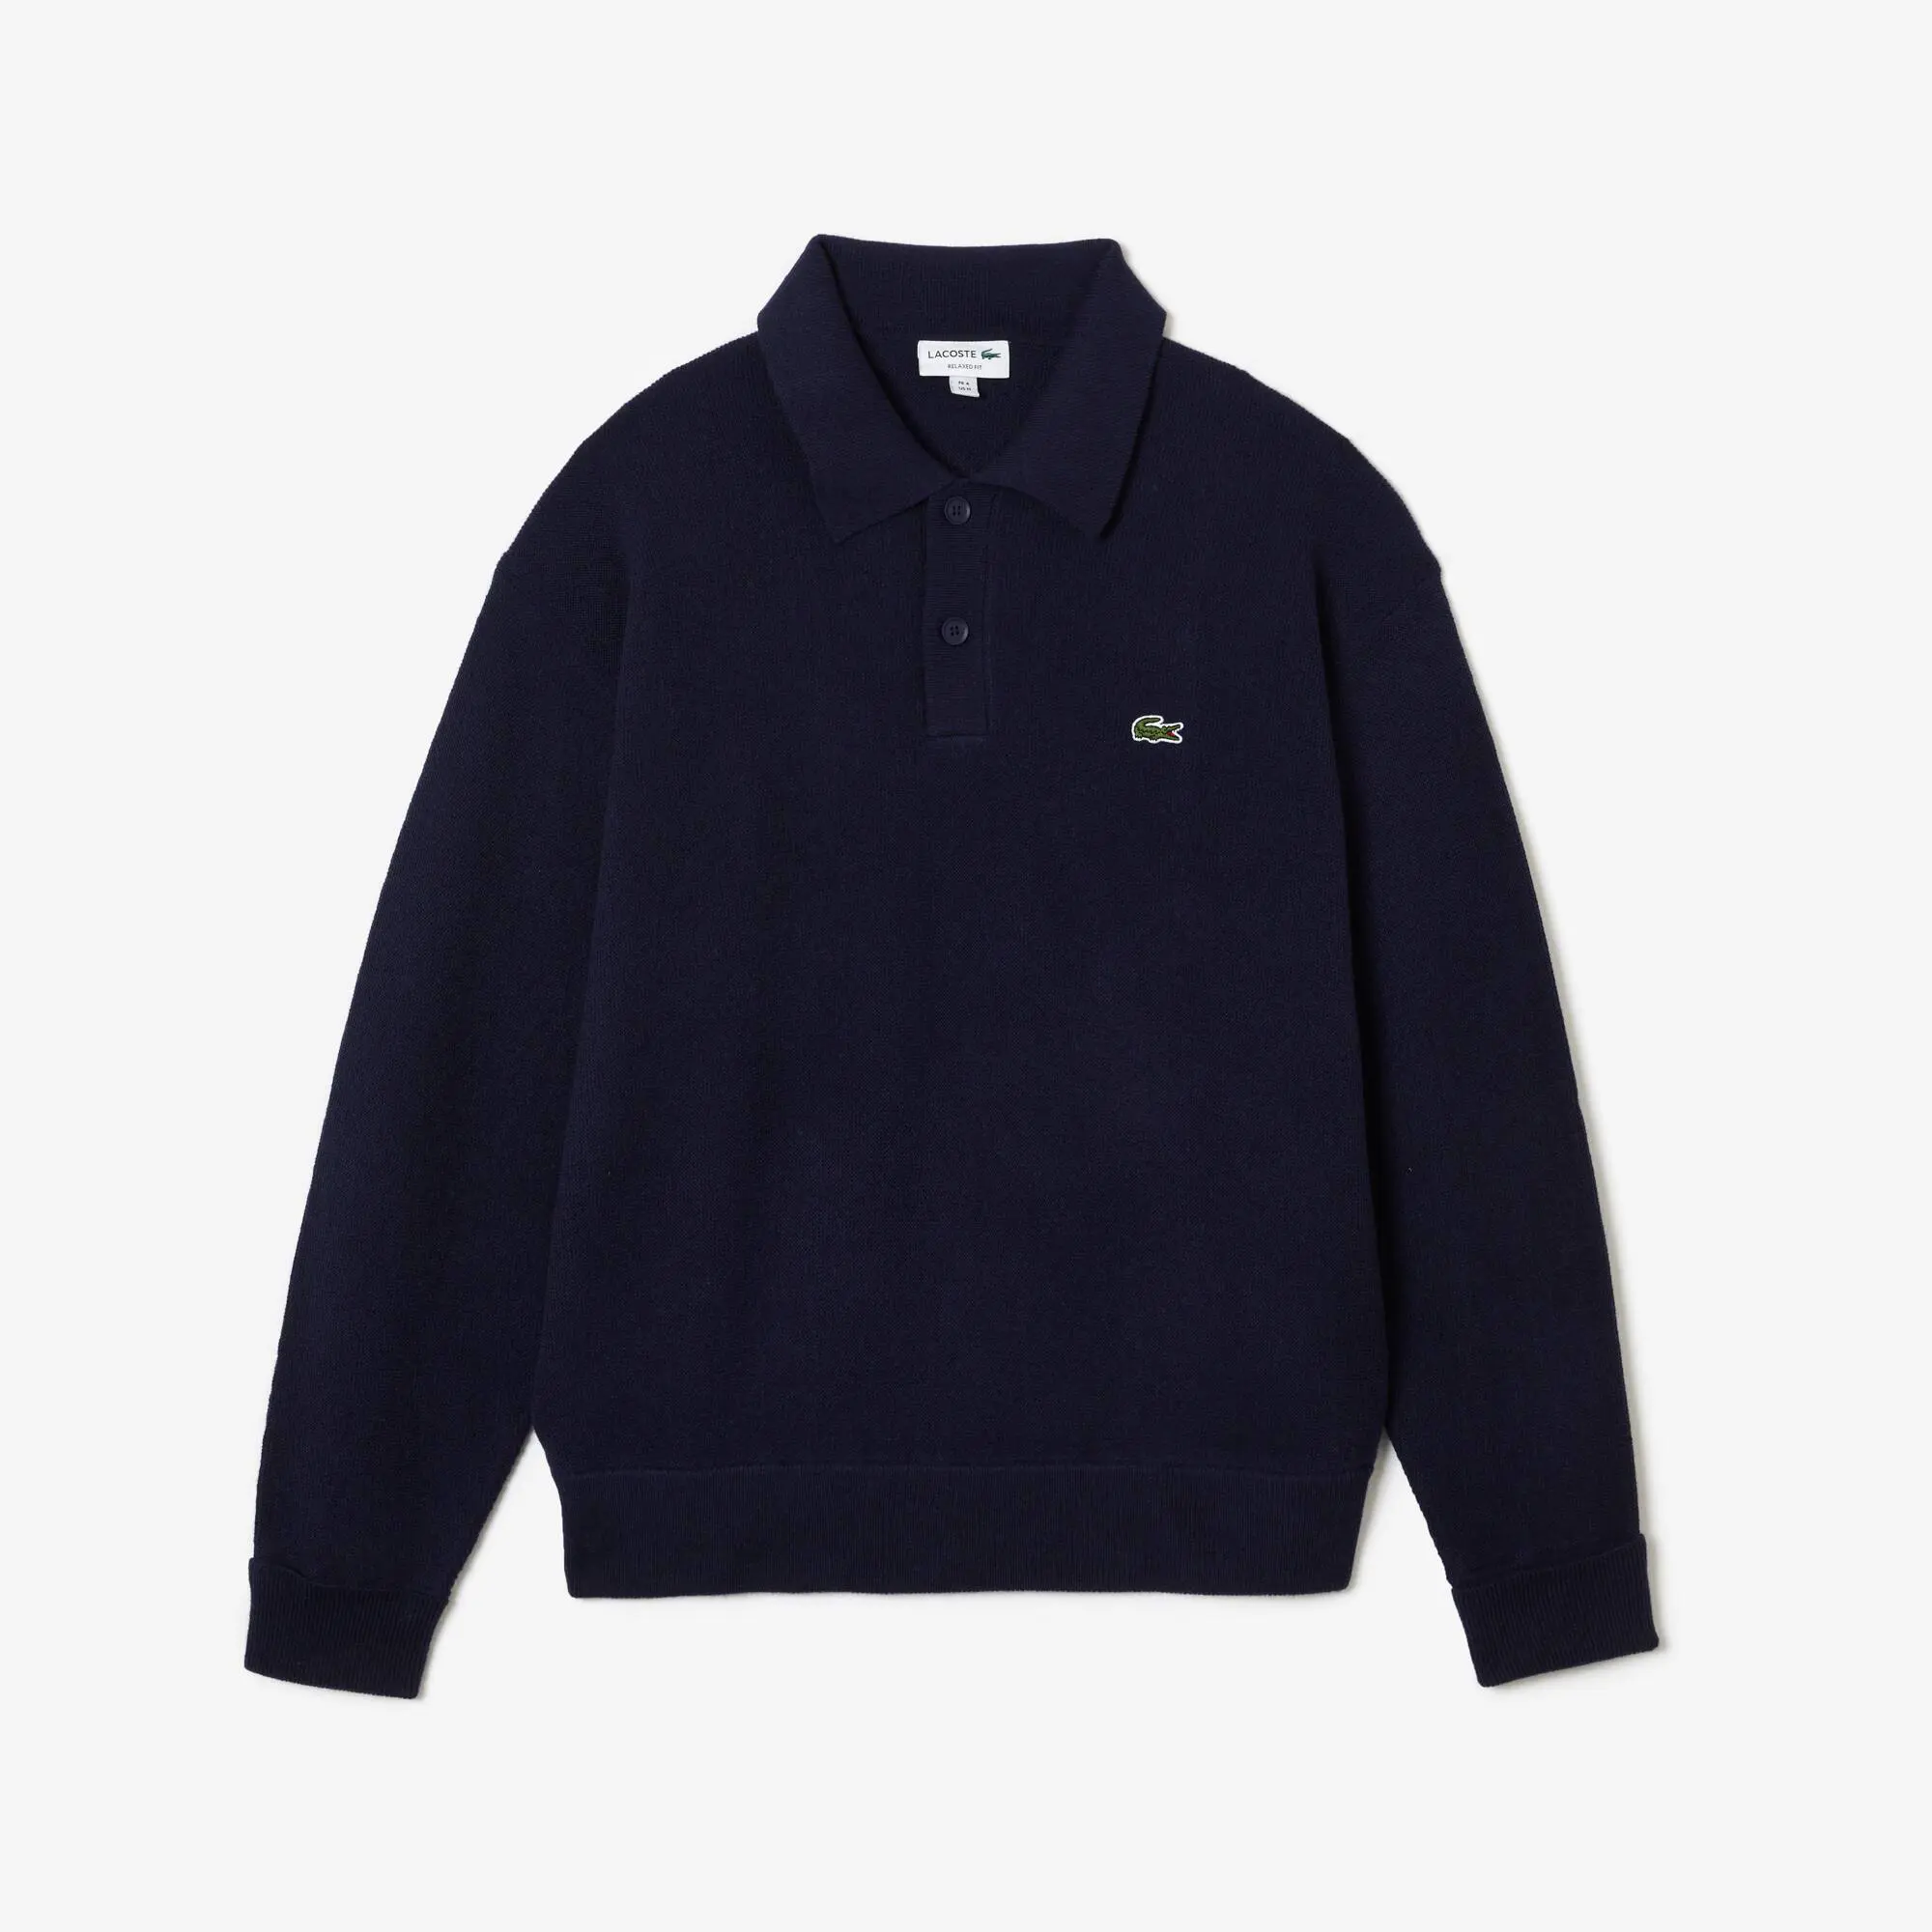 Lacoste Pull homme Lacoste relaxed fit col polo en laine. 2